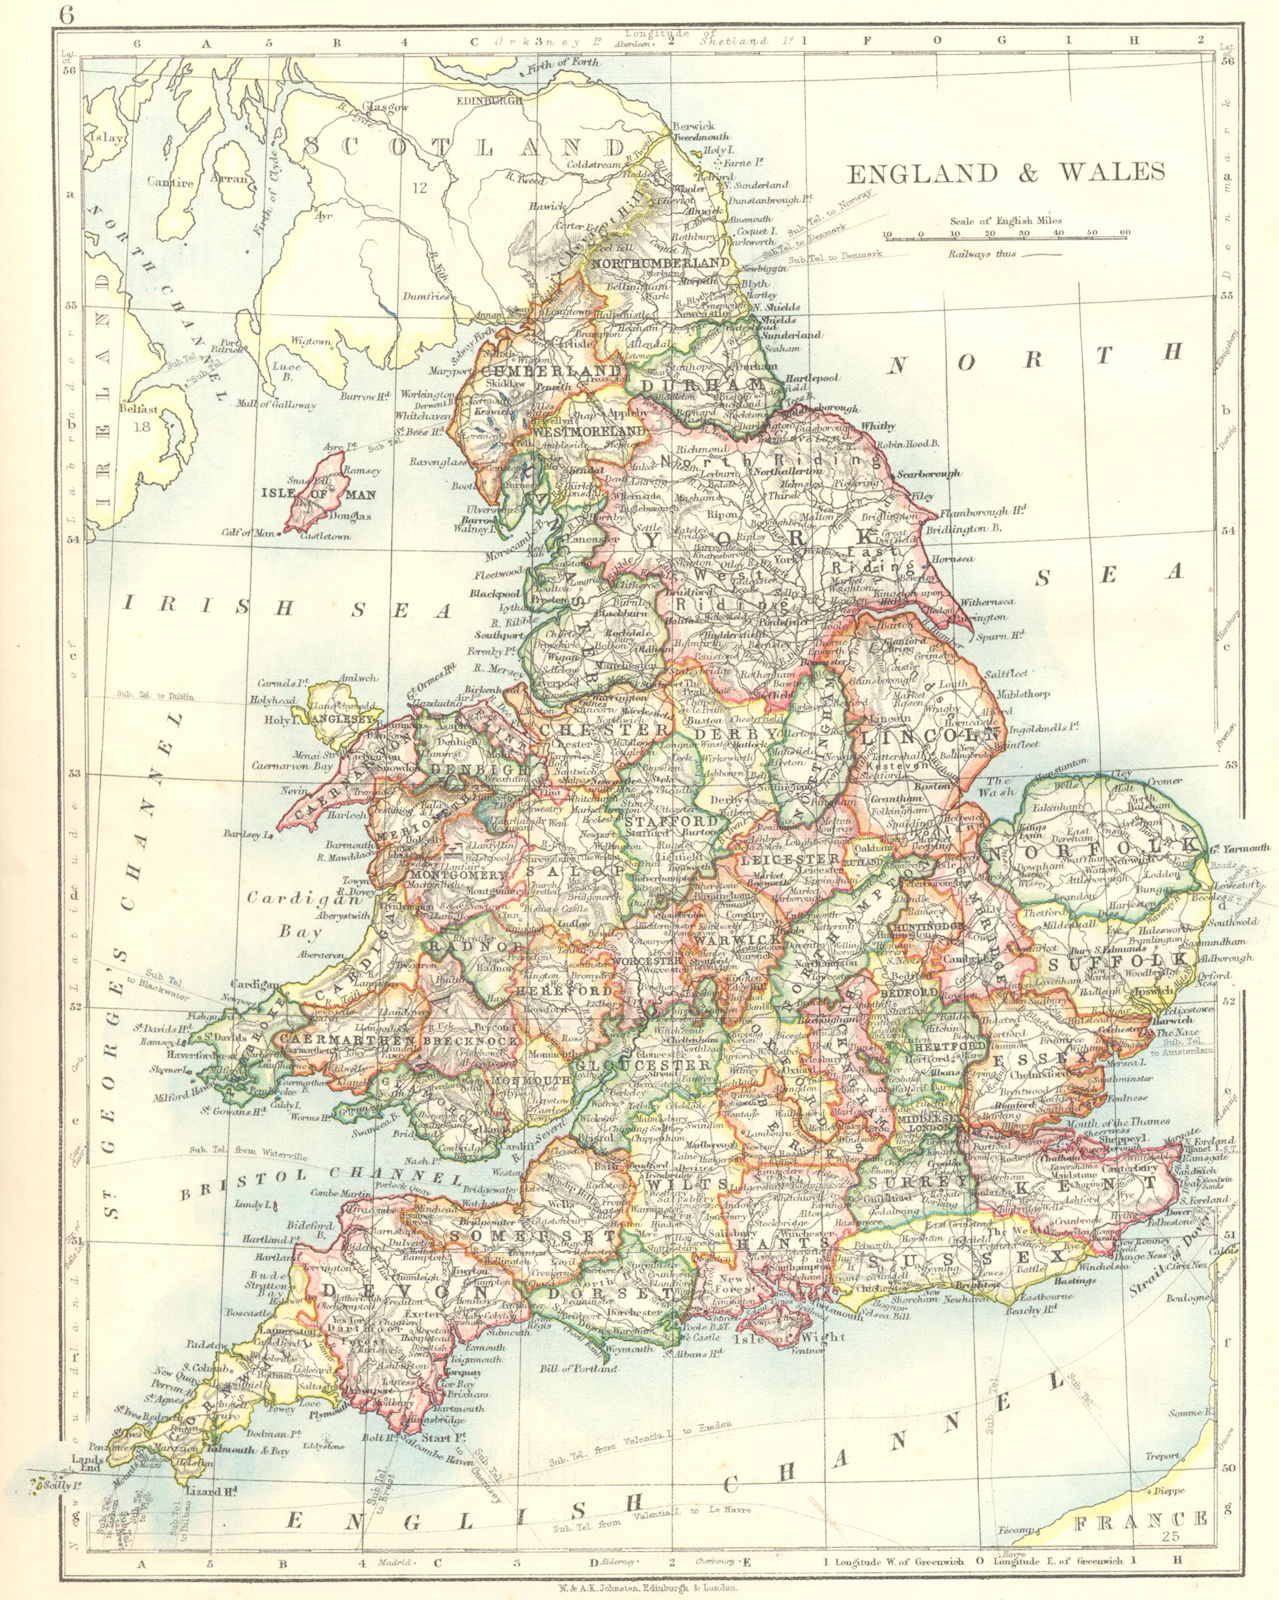 ENGLAND AND WALES. Counties. Westmoreland. Telegraph cables. JOHNSTON 1899 map